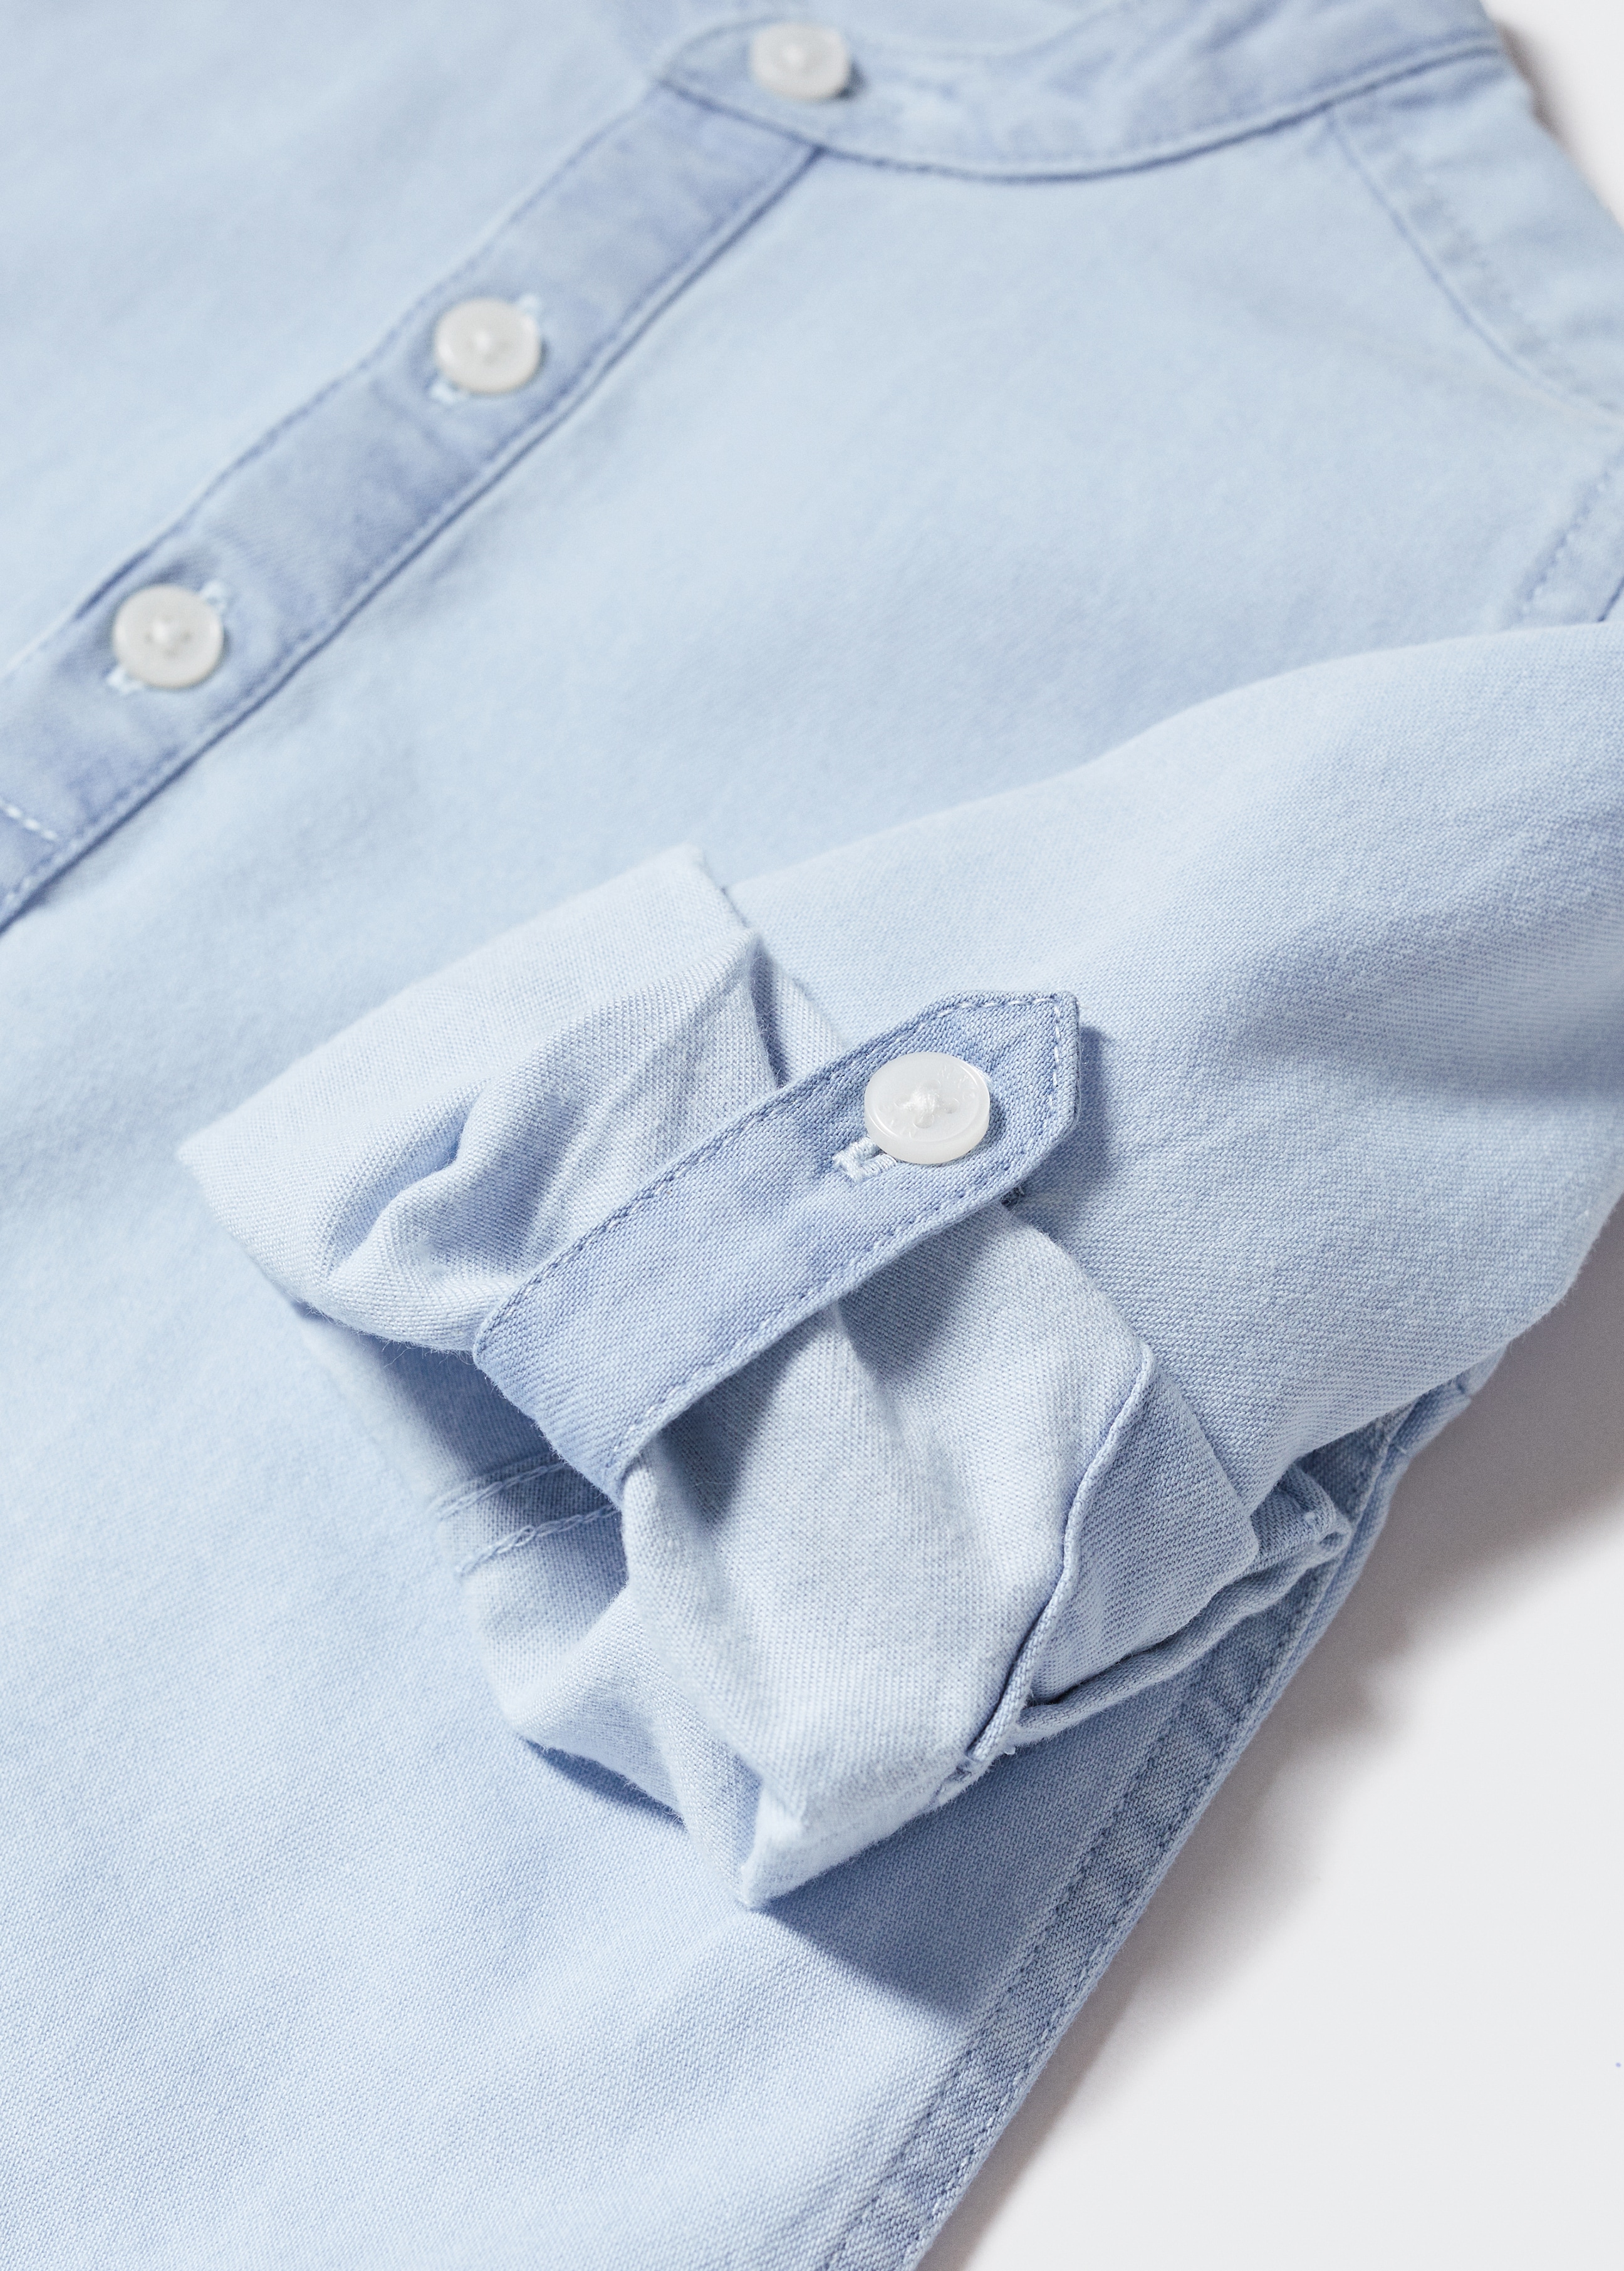 Mao collar shirt - Details of the article 0